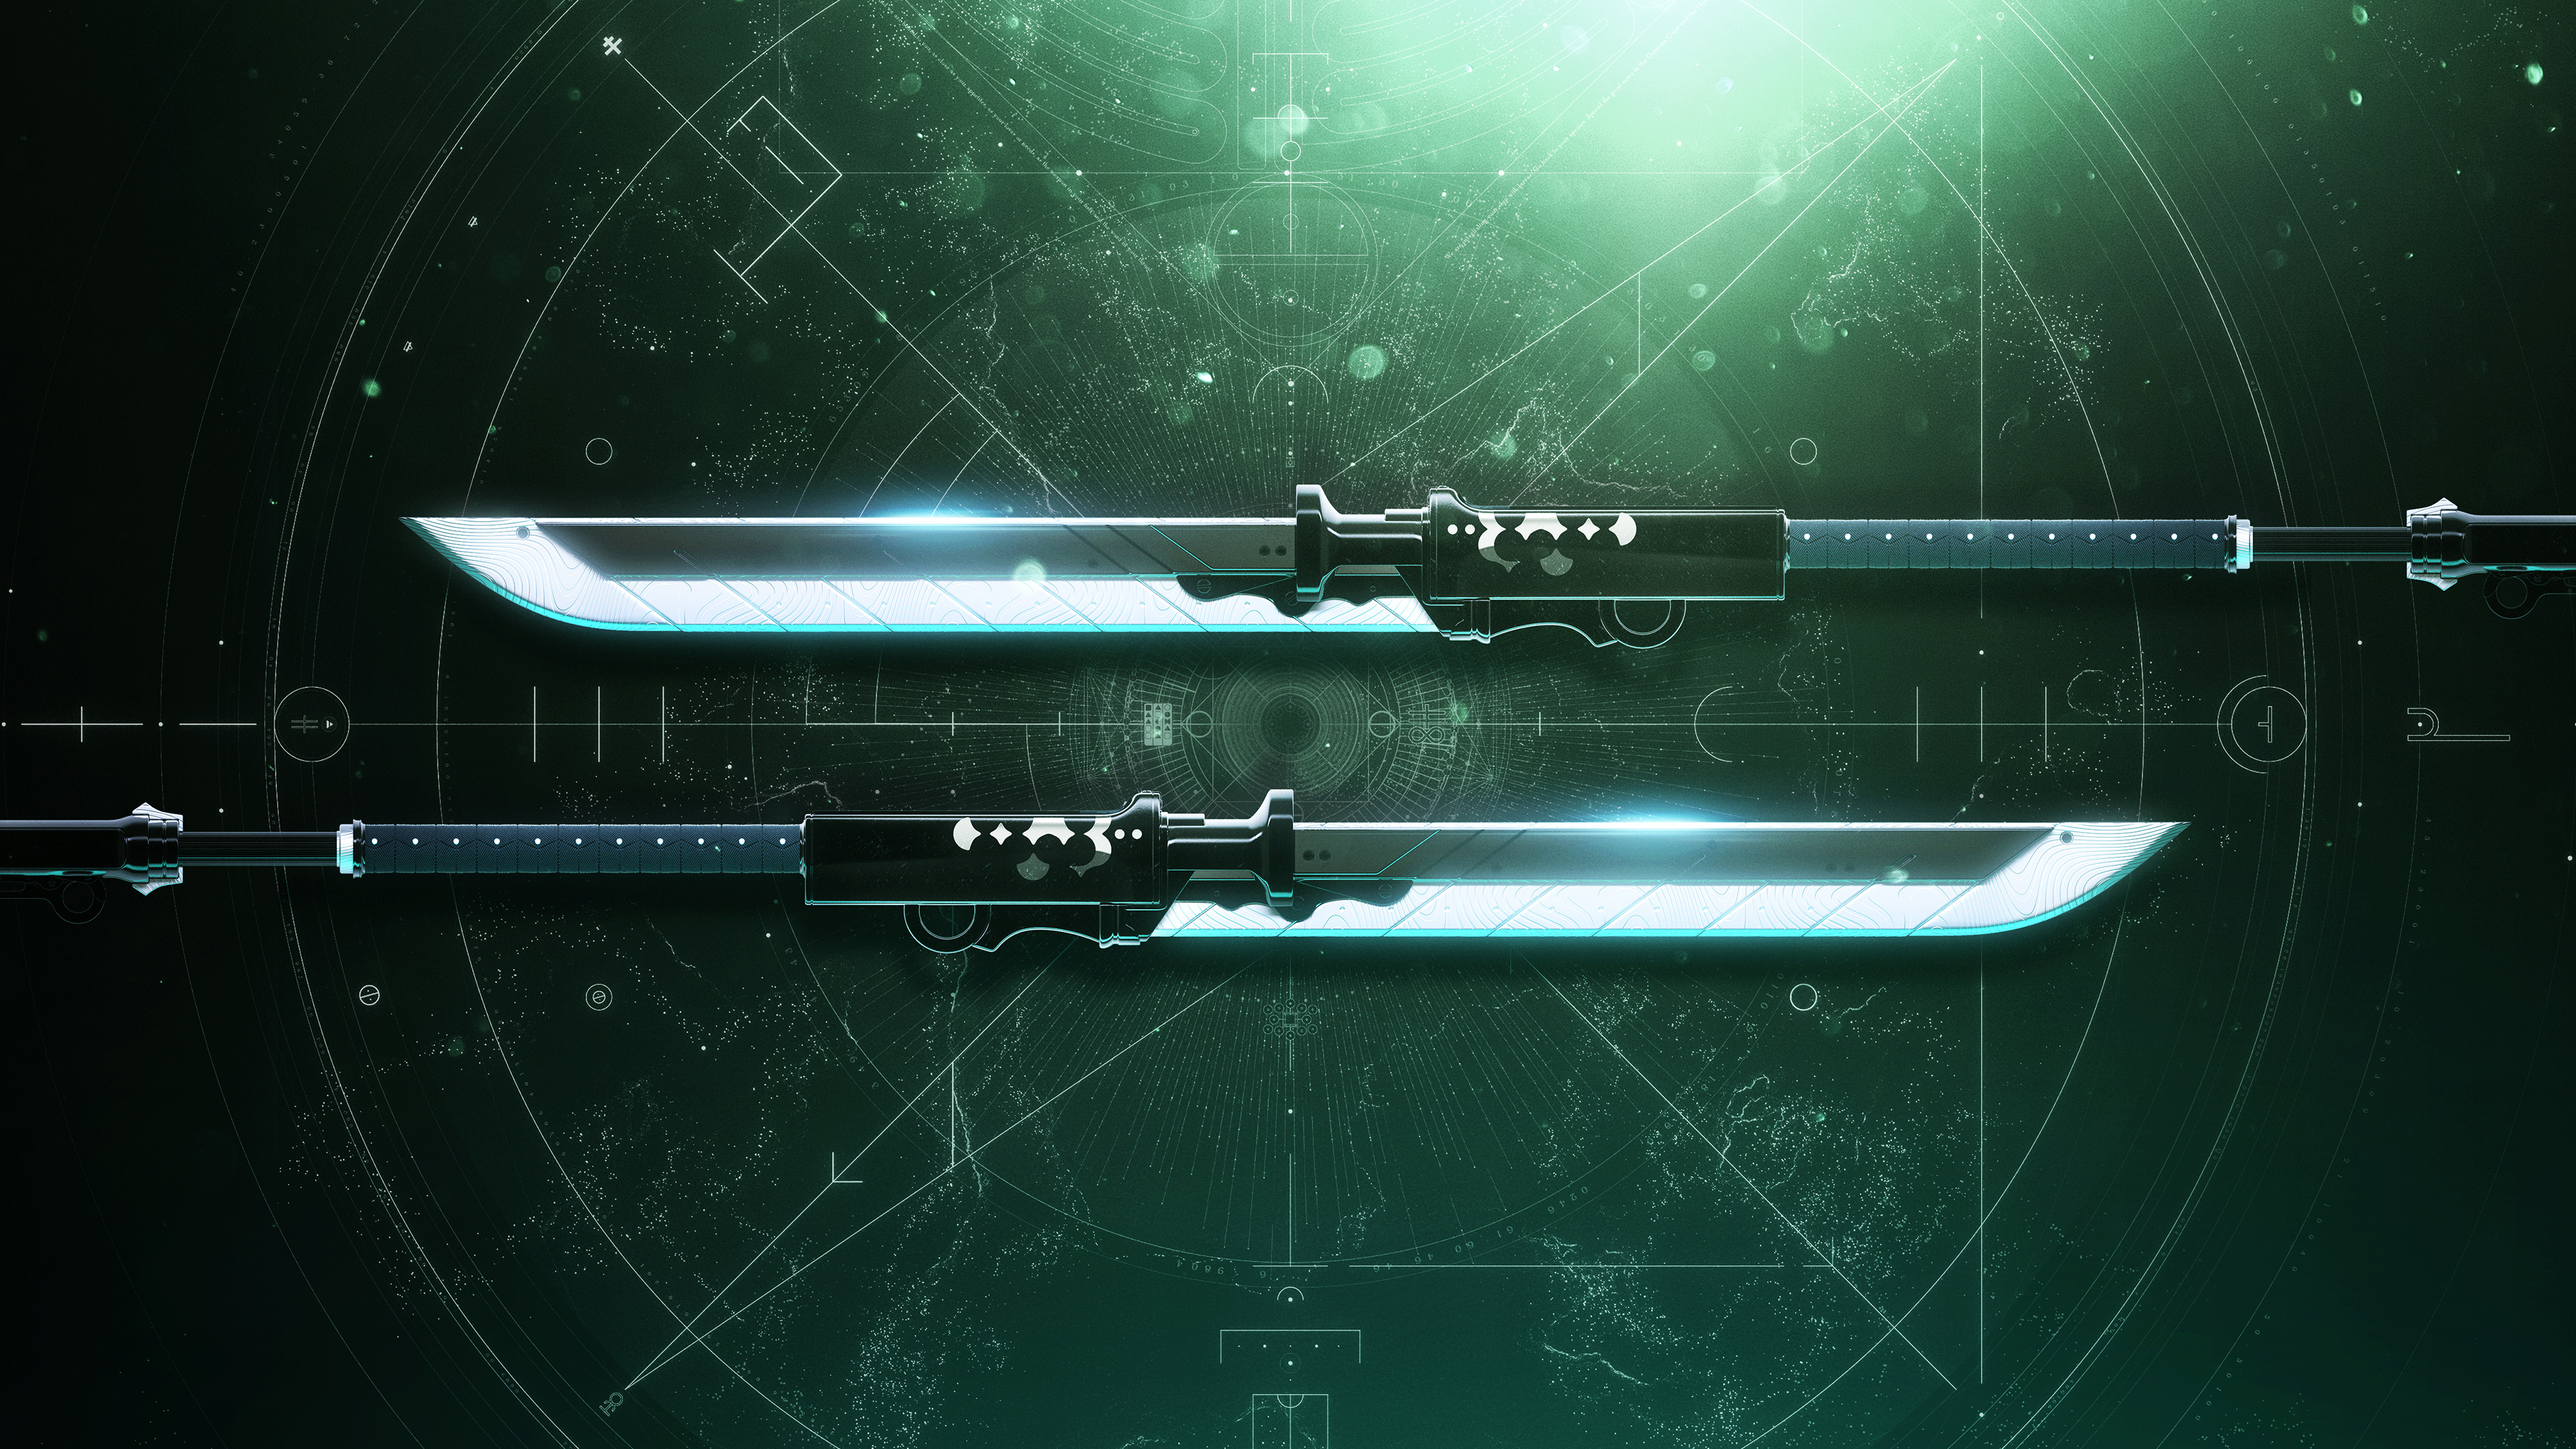 Destiny 2: The Witch Queen: The glaive, A new weapon type, introduced in the expansion. 3840x2160 4K Wallpaper.